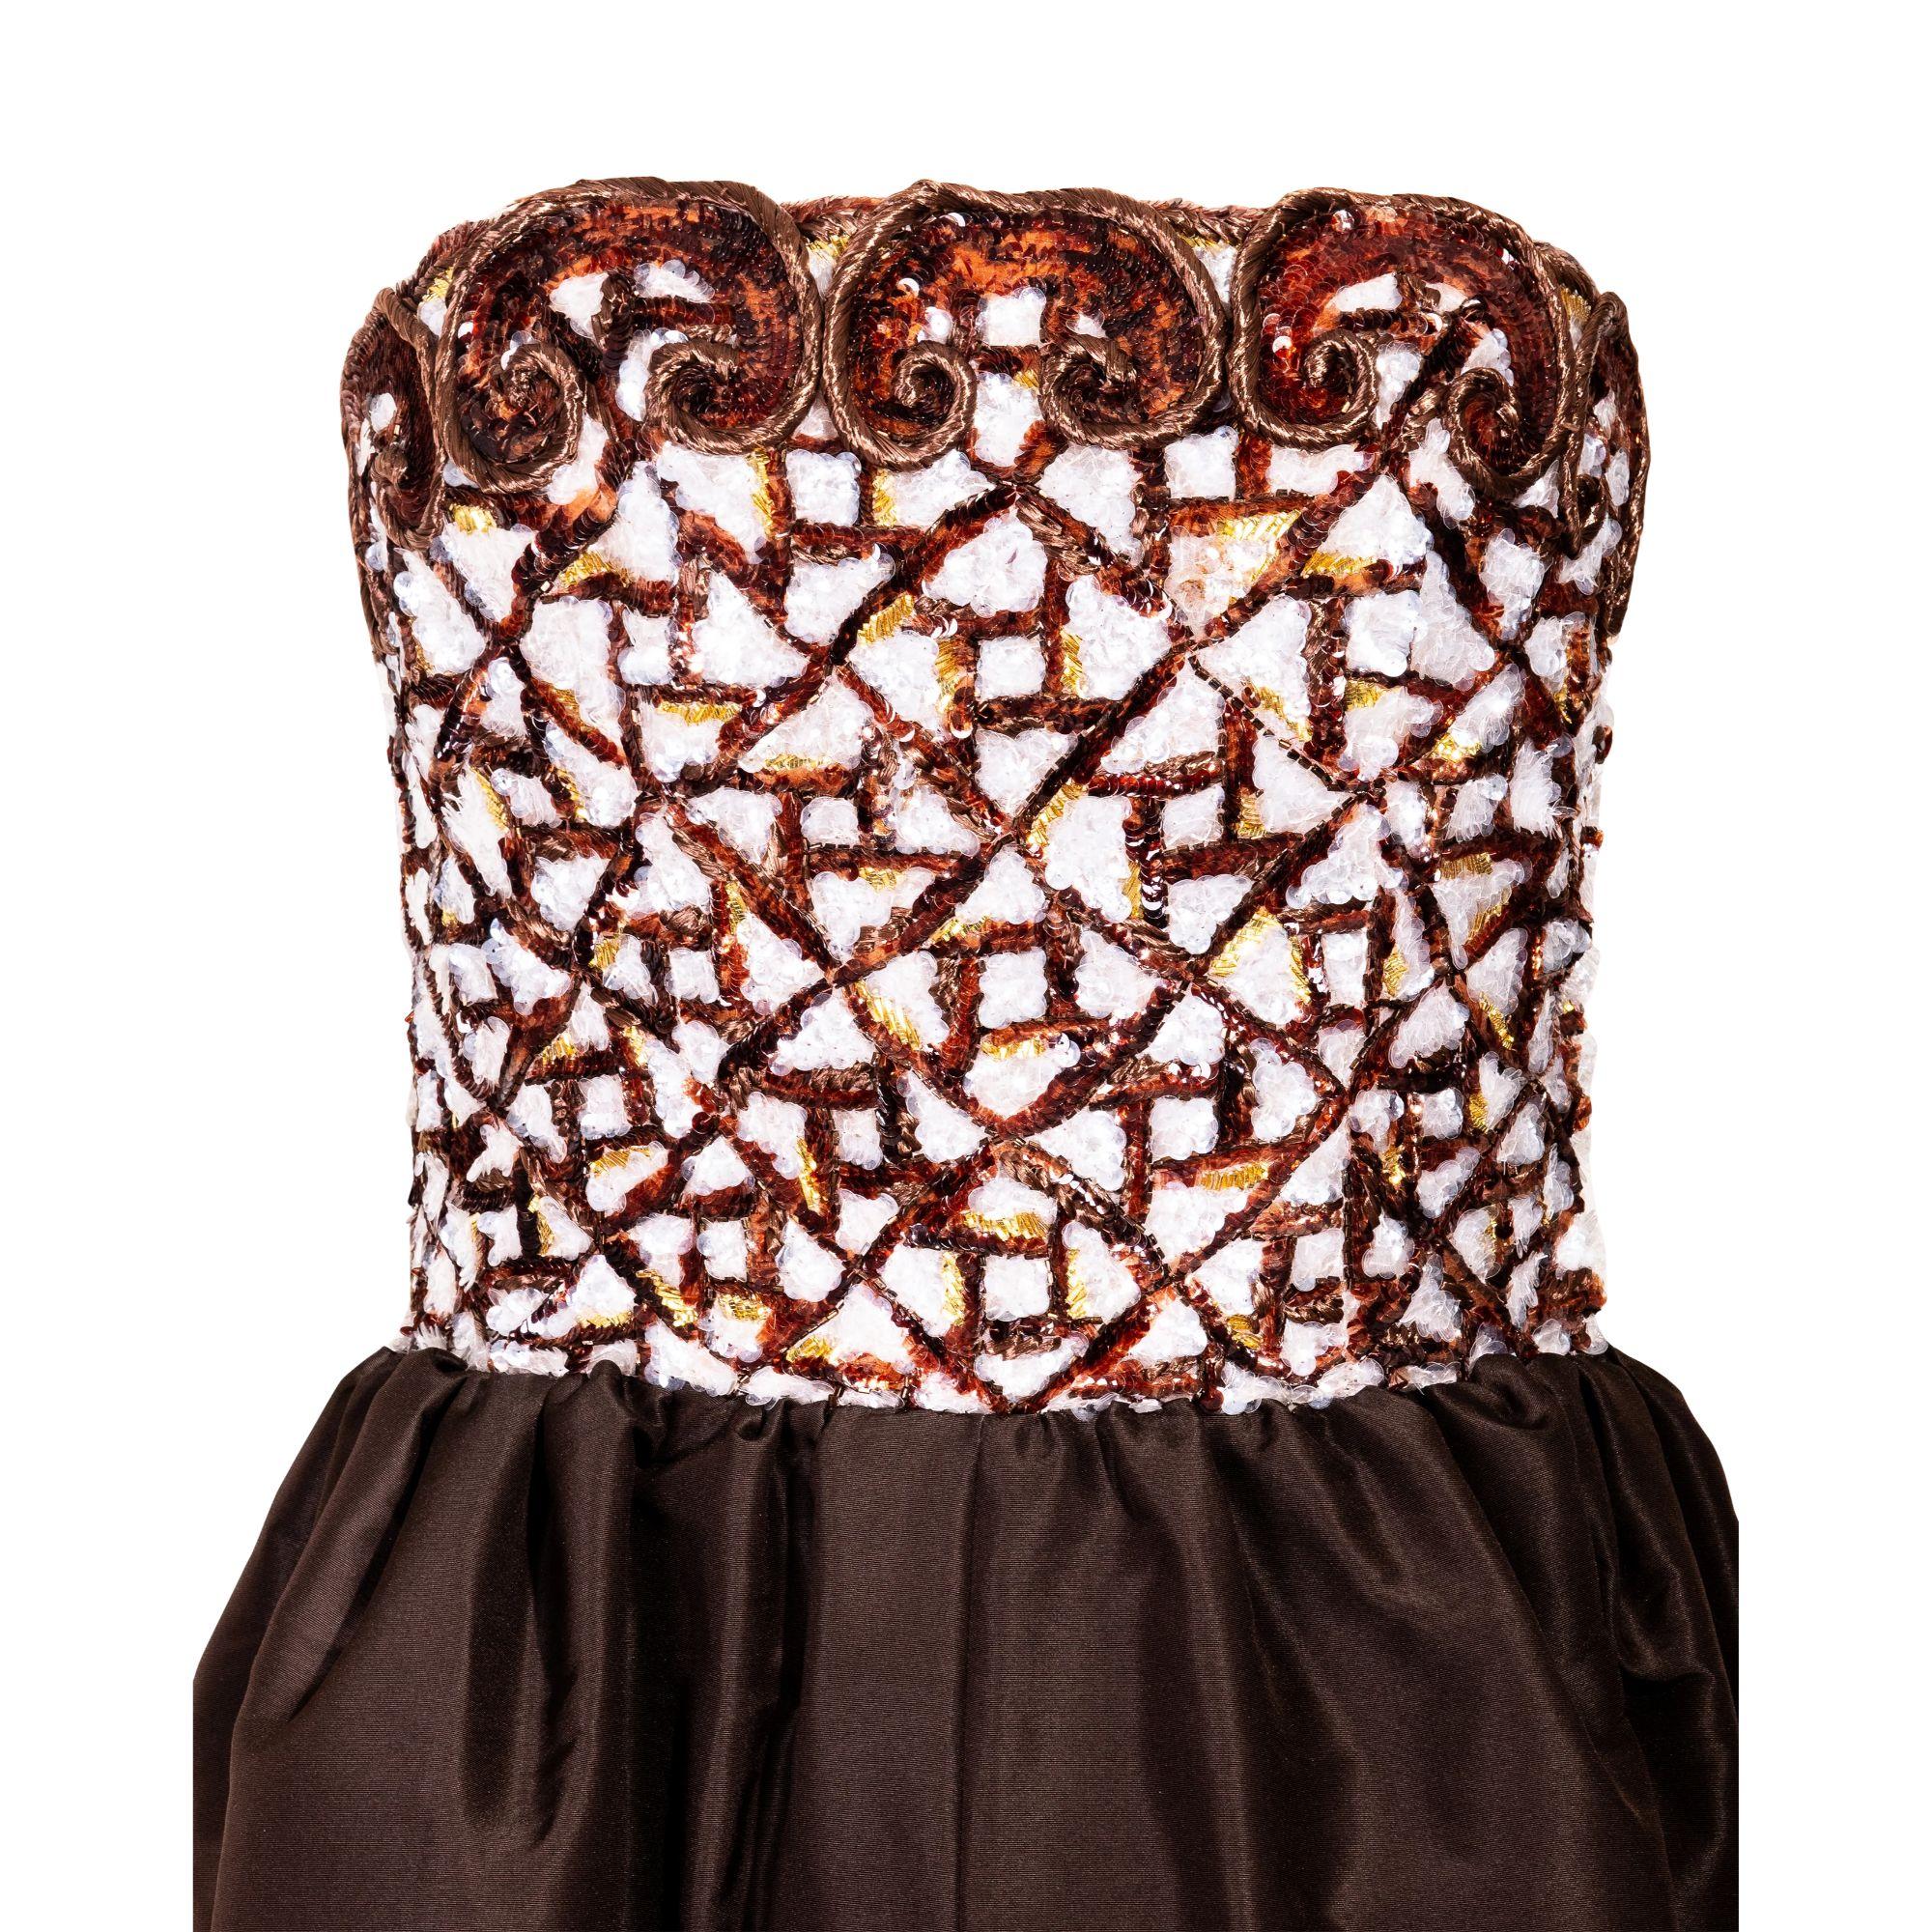 Women's S/S 1992 Givenchy Haute Couture Deep Brown Strapless Gown with Embroidered Bust For Sale